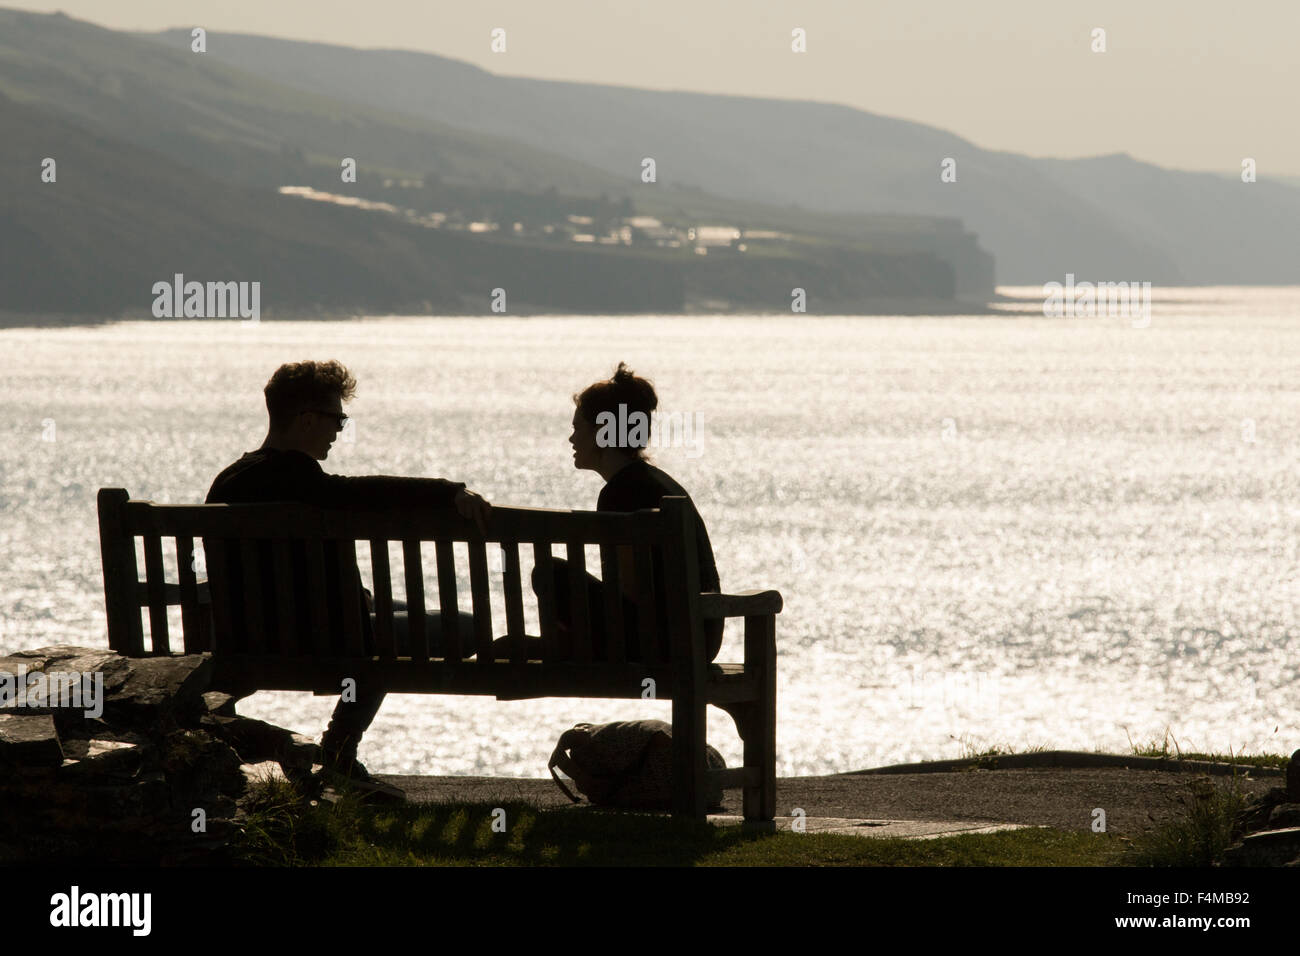 A young couple talk on a bench while overlooking the British coastline, Britain, UK Stock Photo